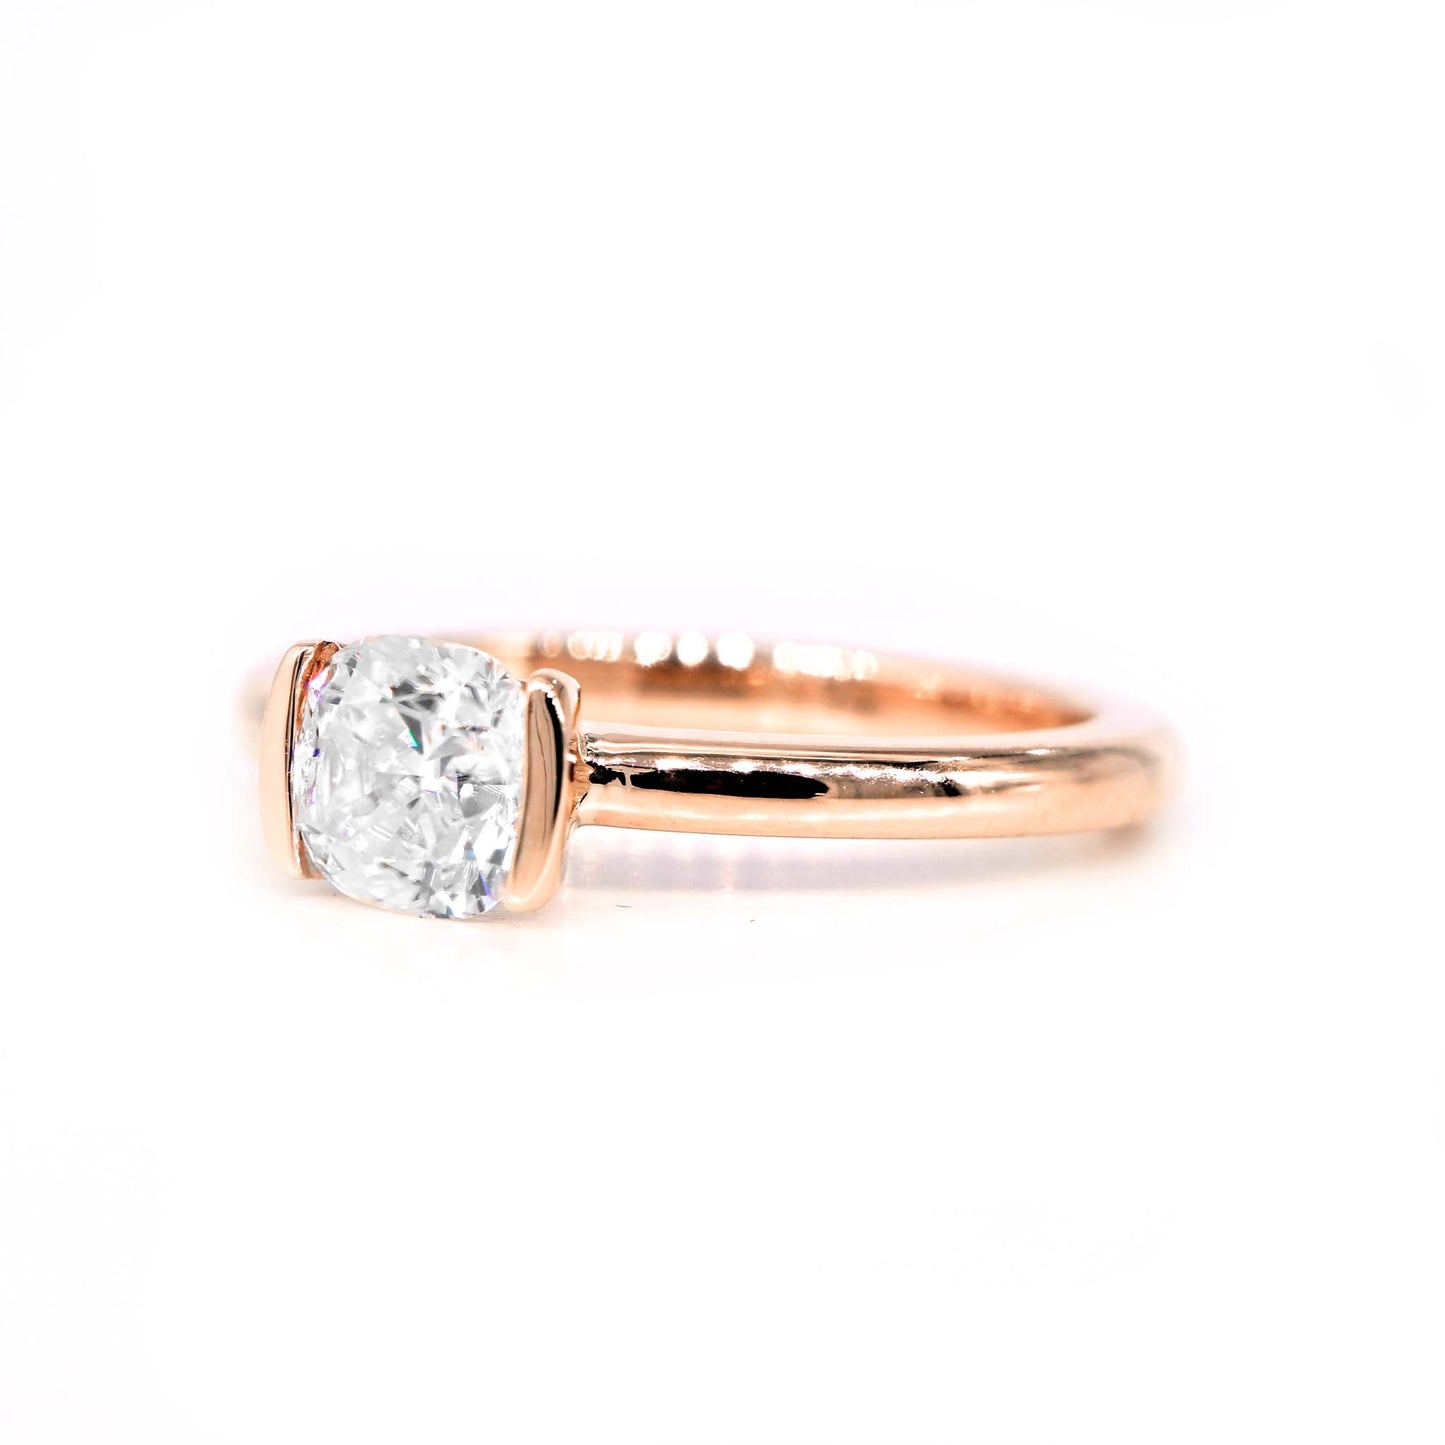 Cushion cut engagement ring in 14k rosegold